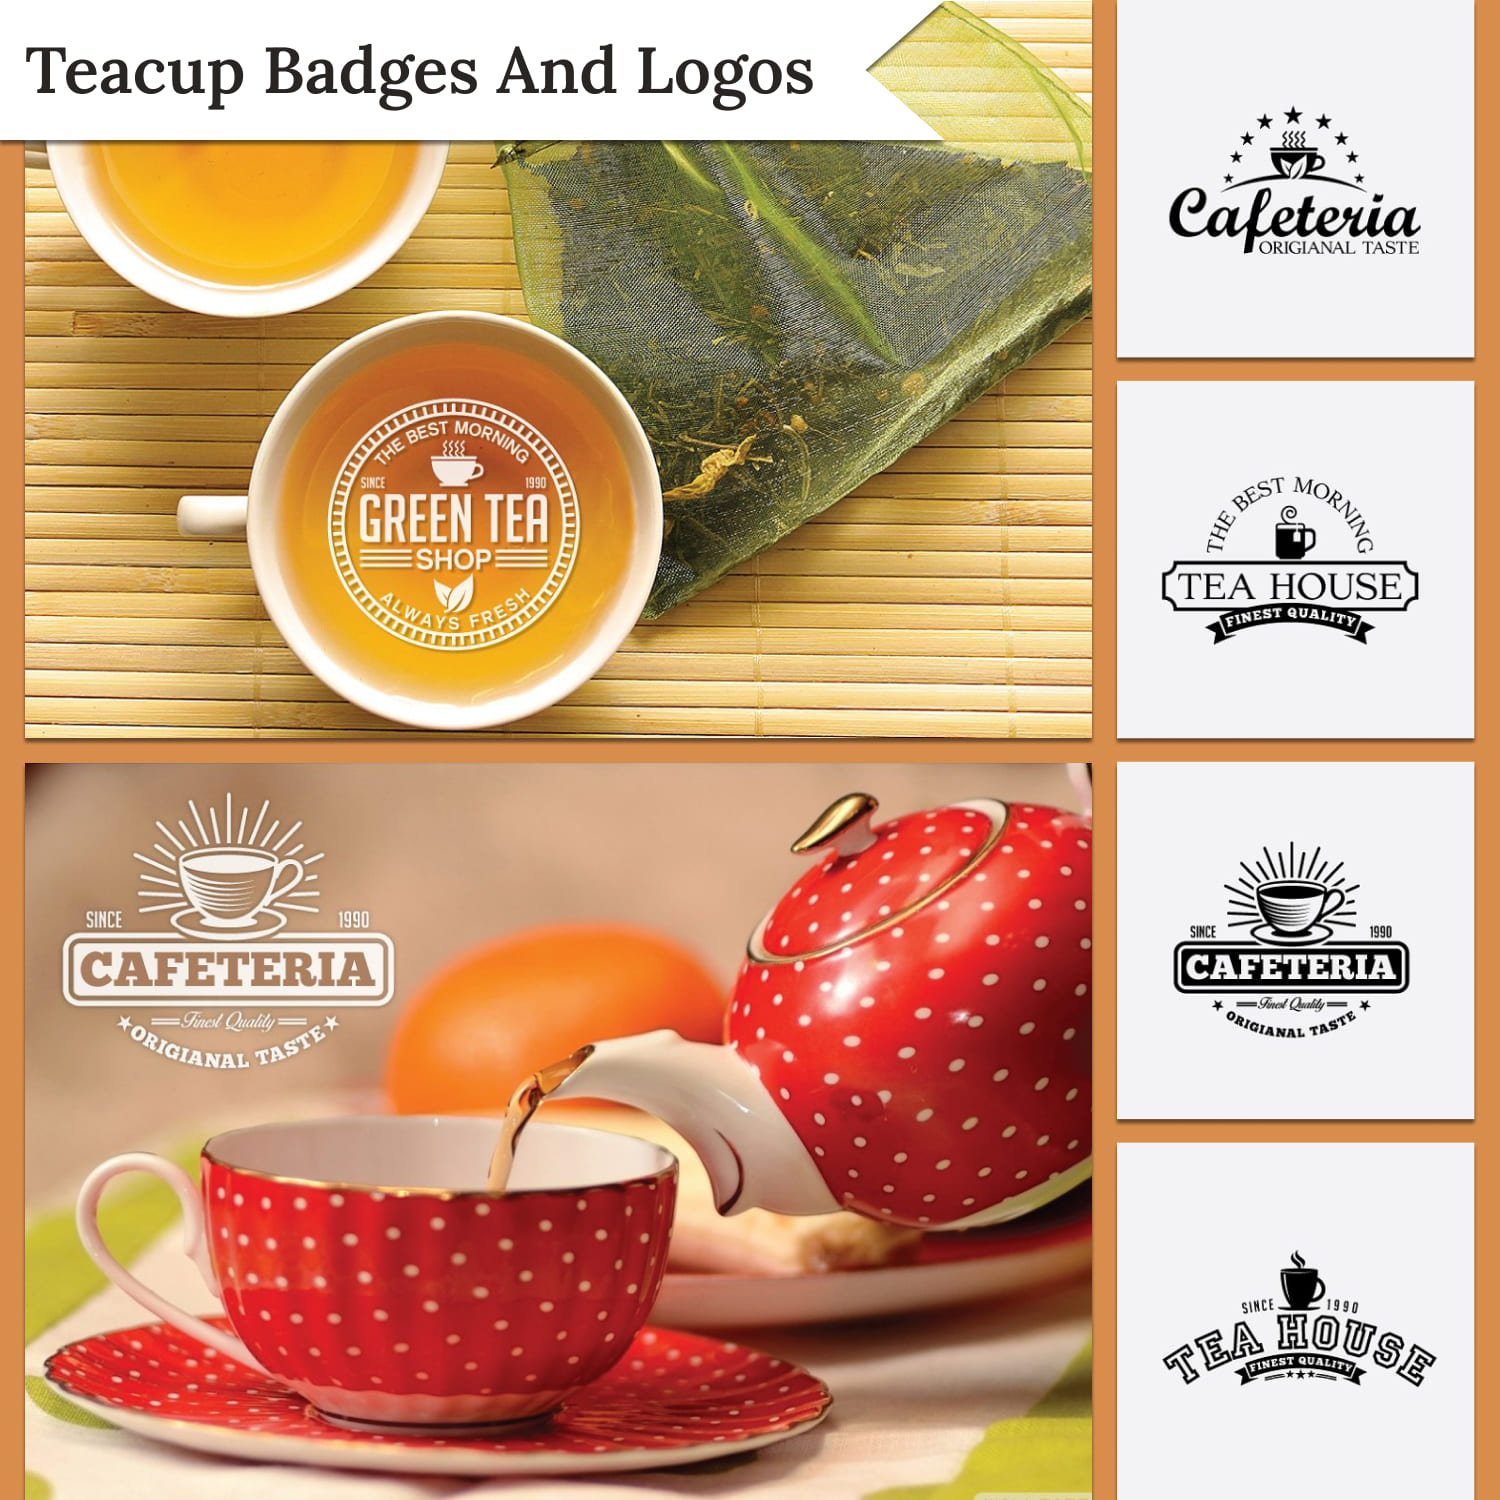 Teacup badges and logos - main image preview.